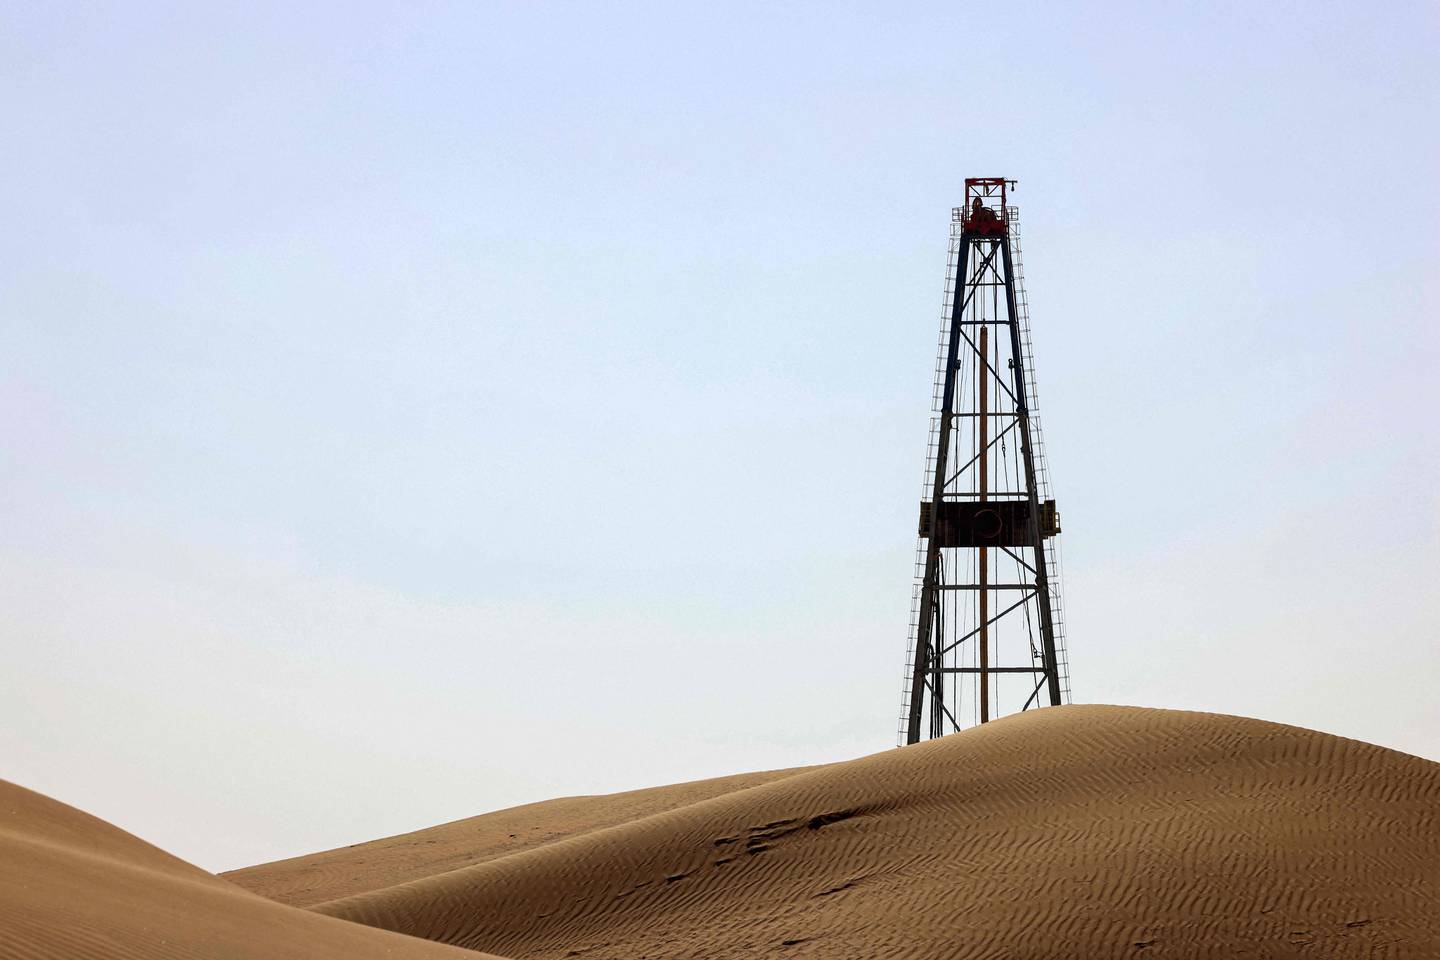 The region's oil producers could accumulate around $1tn in oil windfalls between 2022 and 2026. AFP